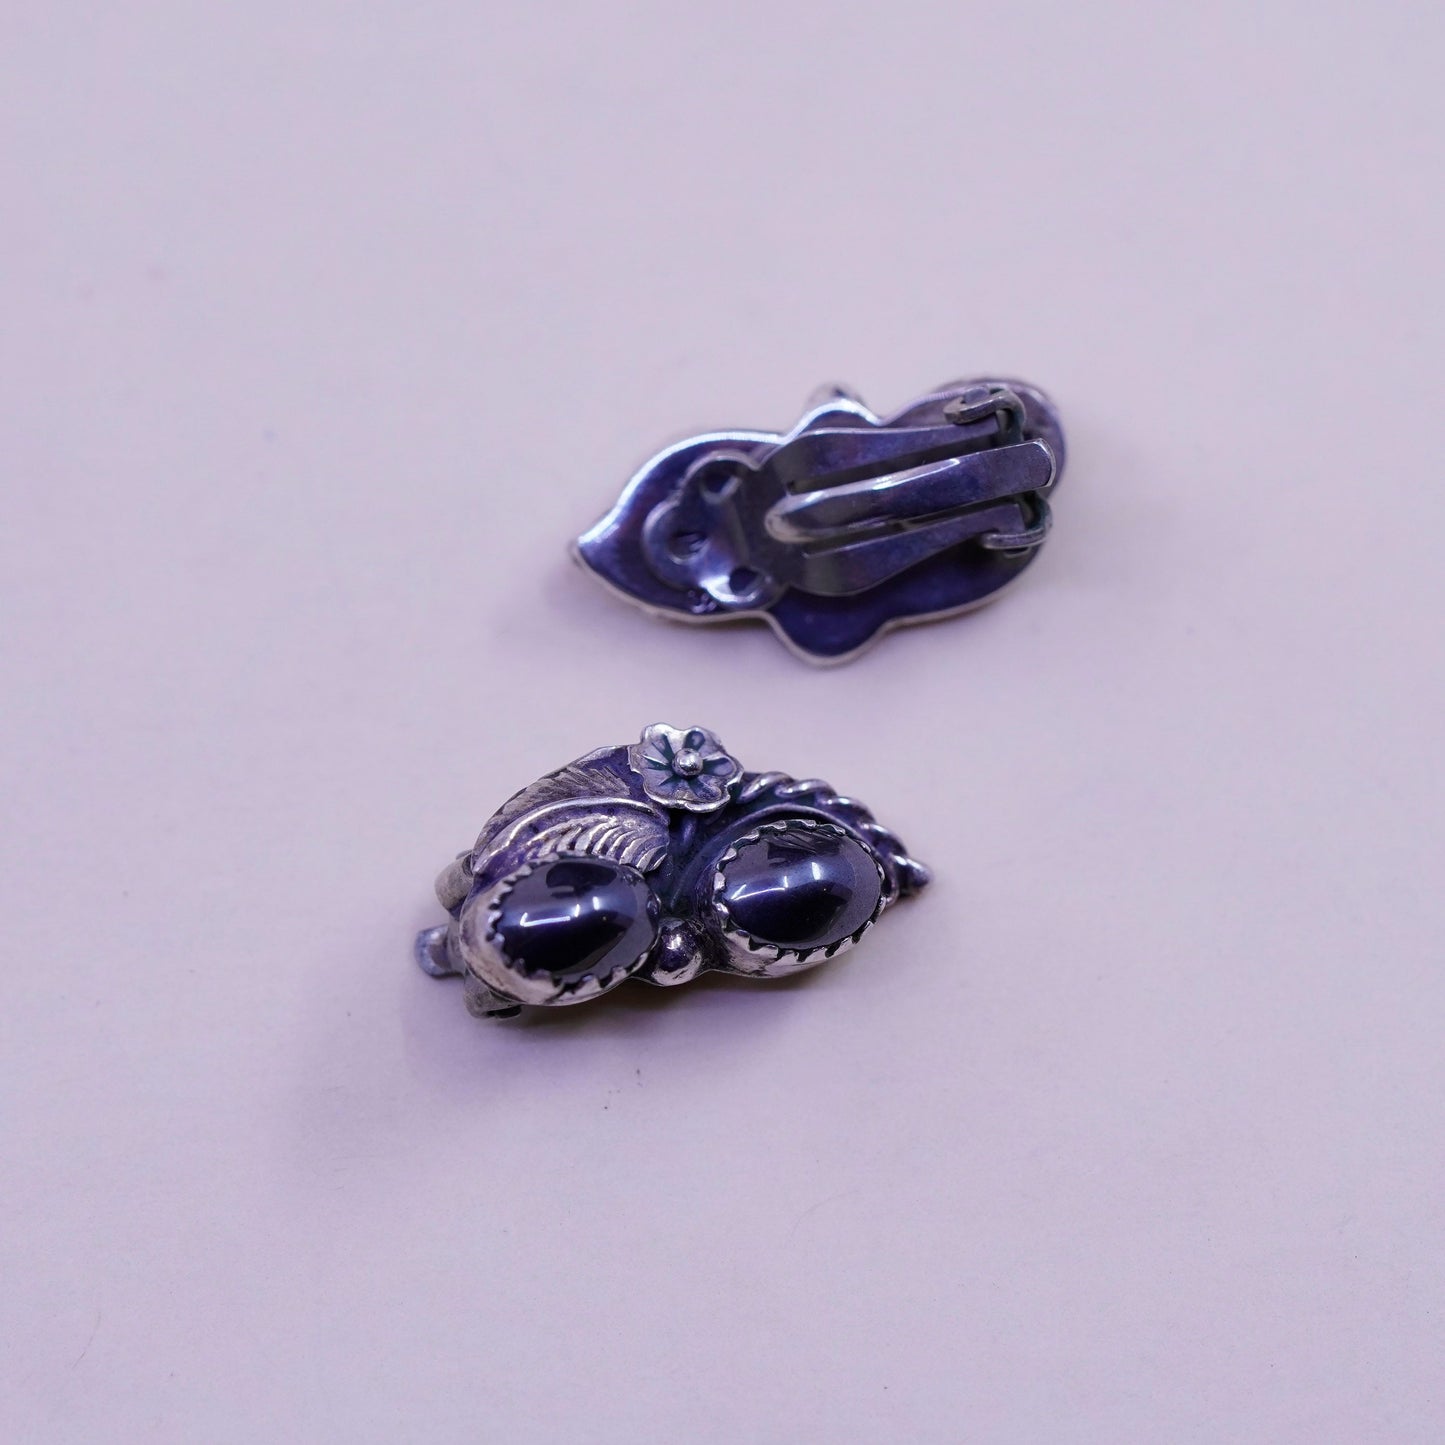 Vintage 925 Sterling silver handmade clip on leafy earrings with hematite